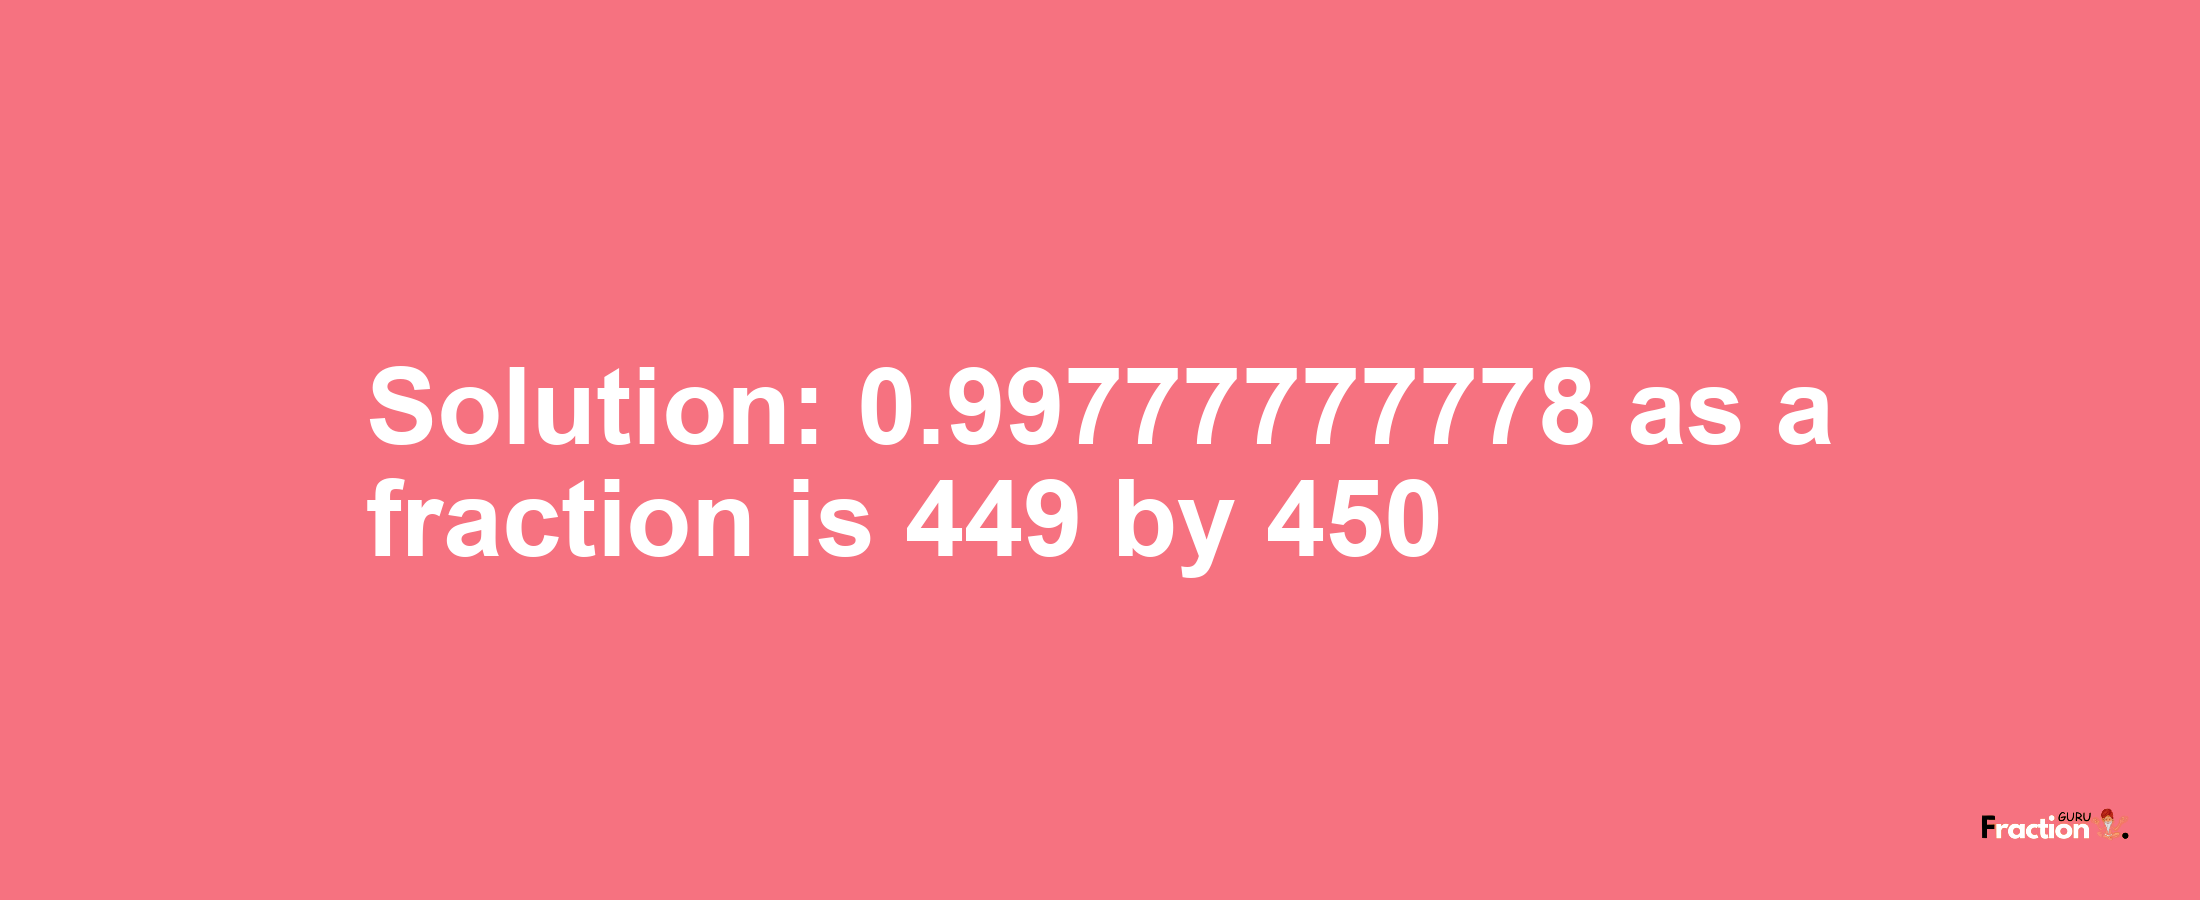 Solution:0.99777777778 as a fraction is 449/450